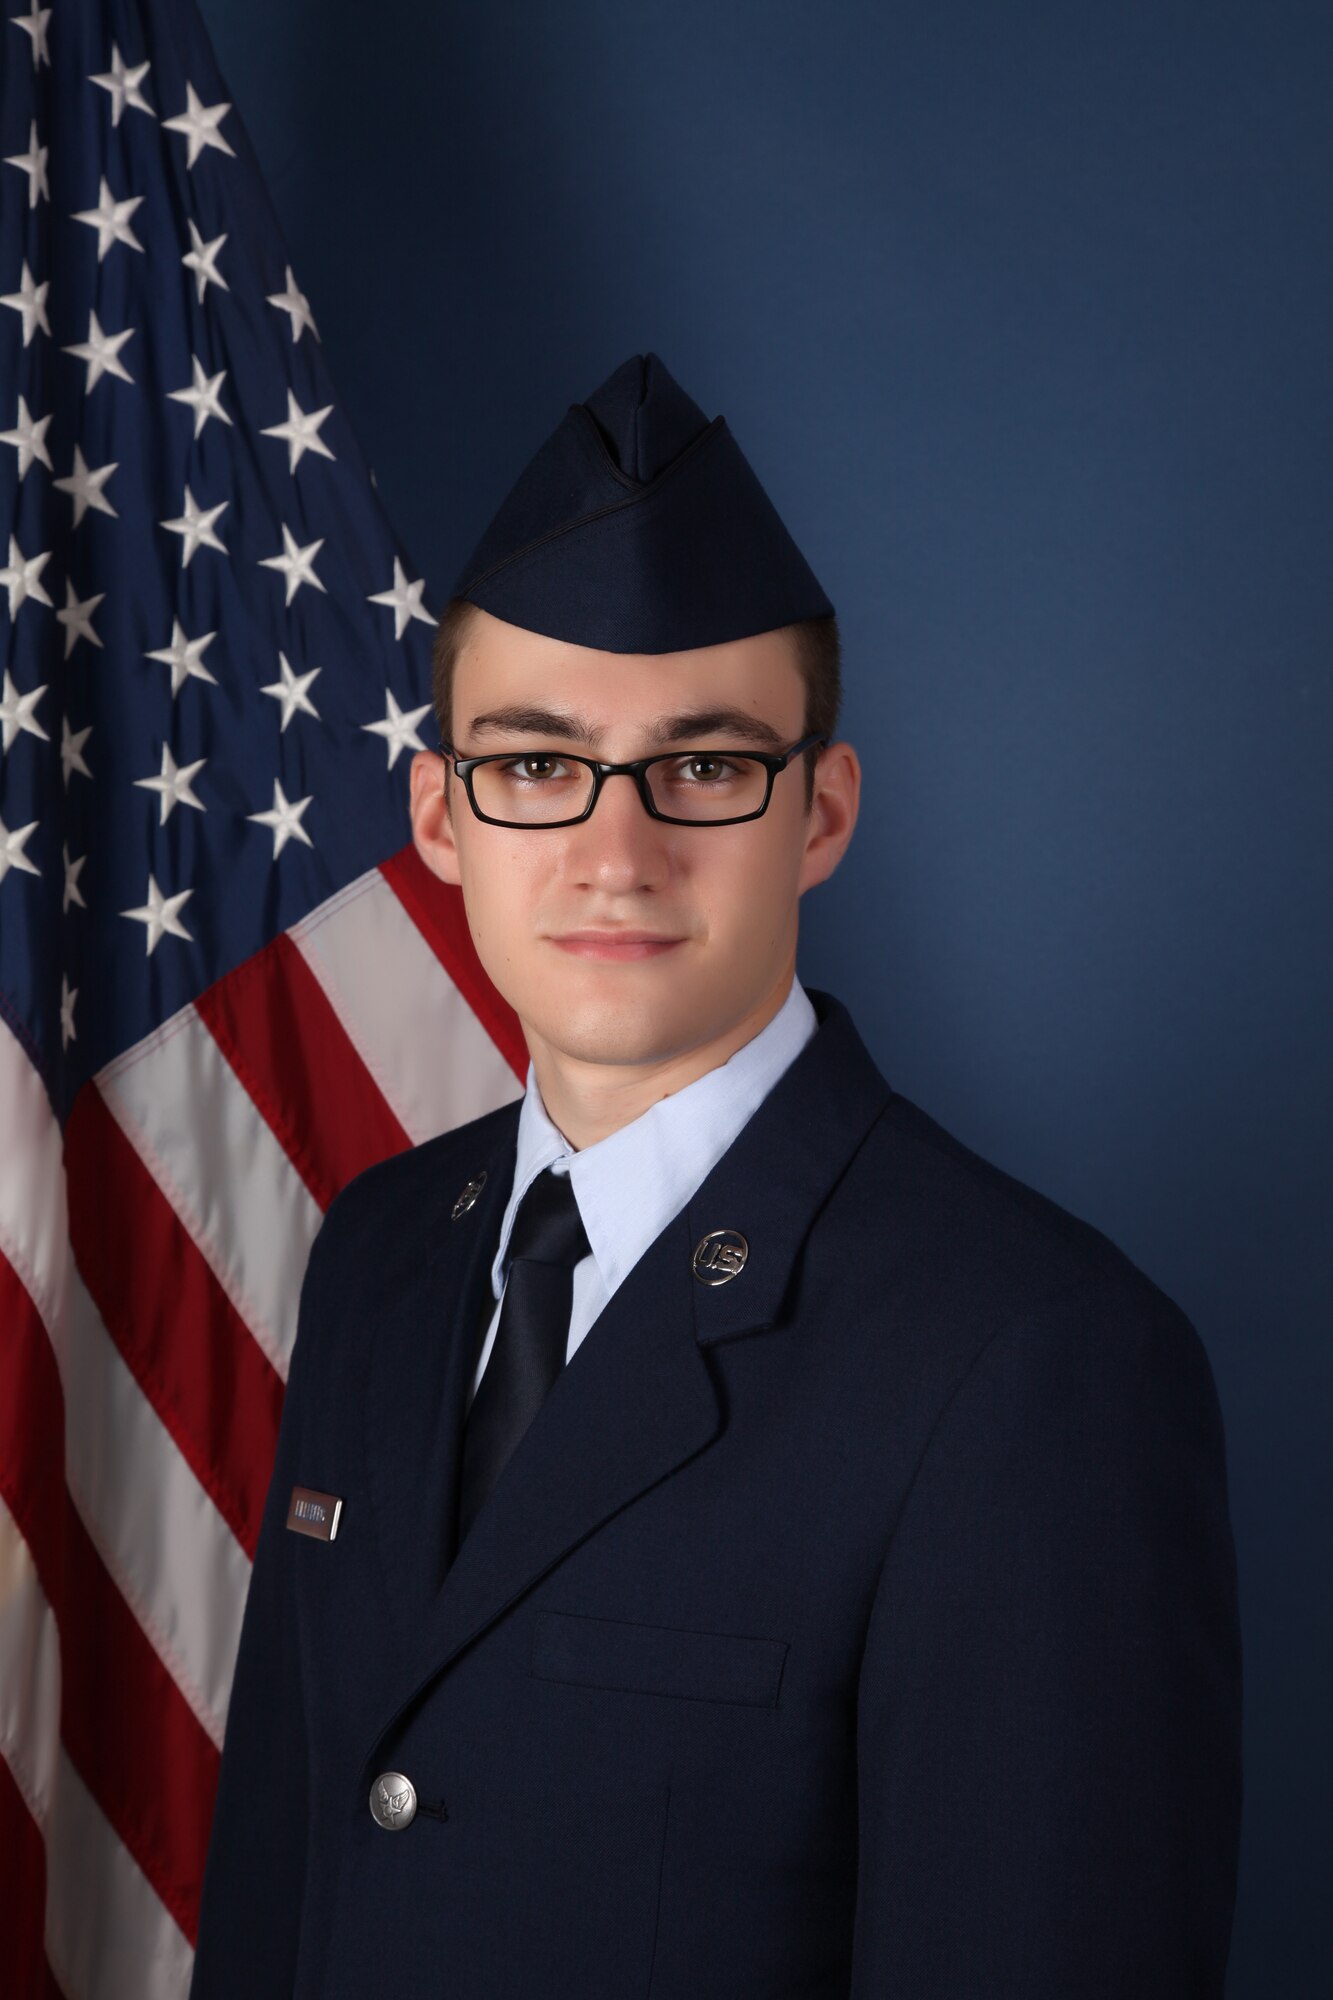 An Airman in dress blues poses for a portrait in front on an American flag.